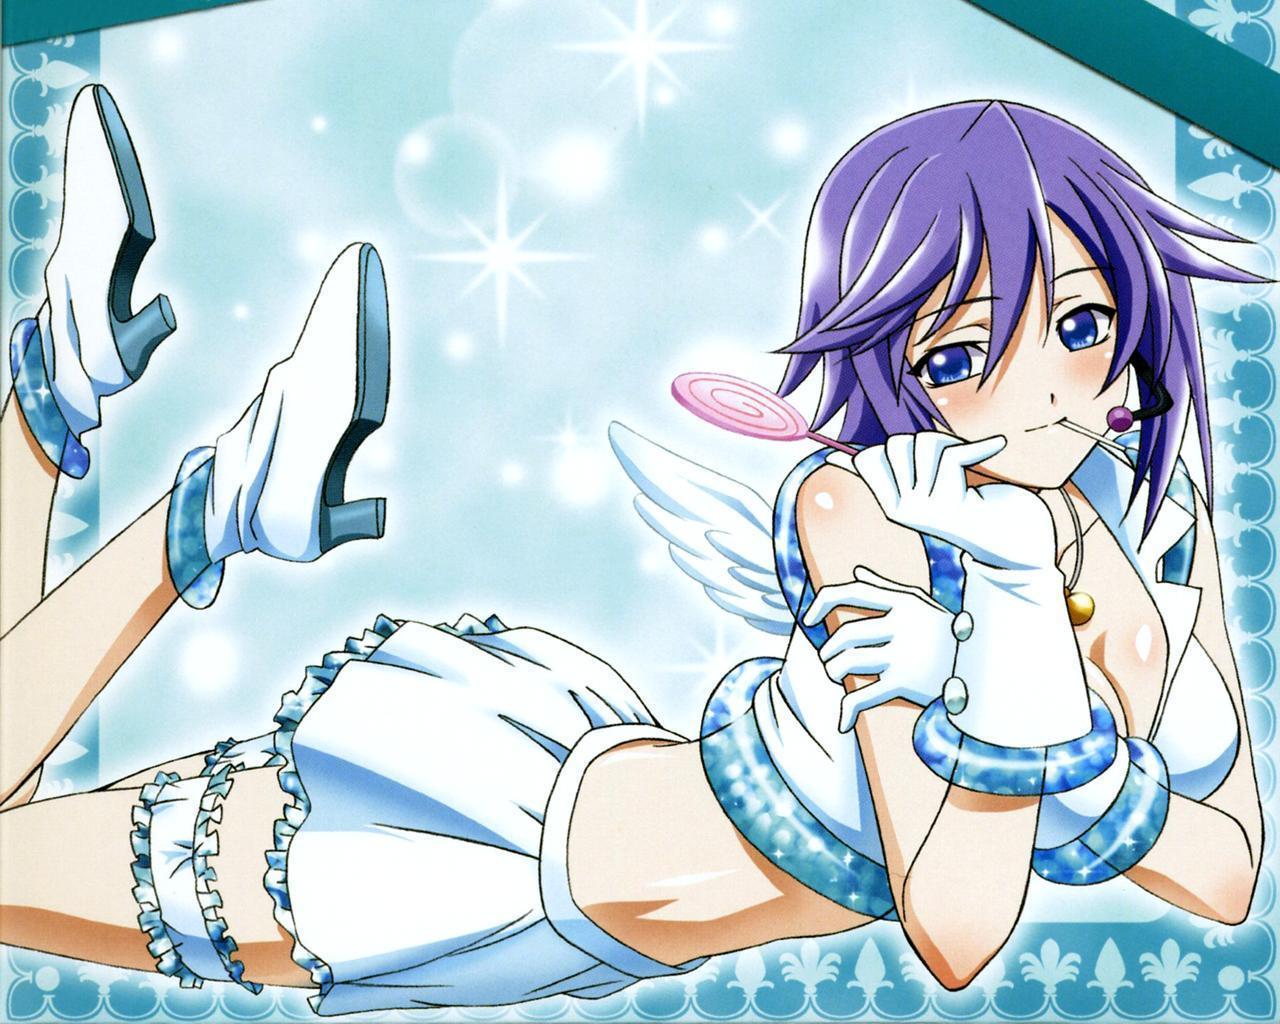 mizore in a pose